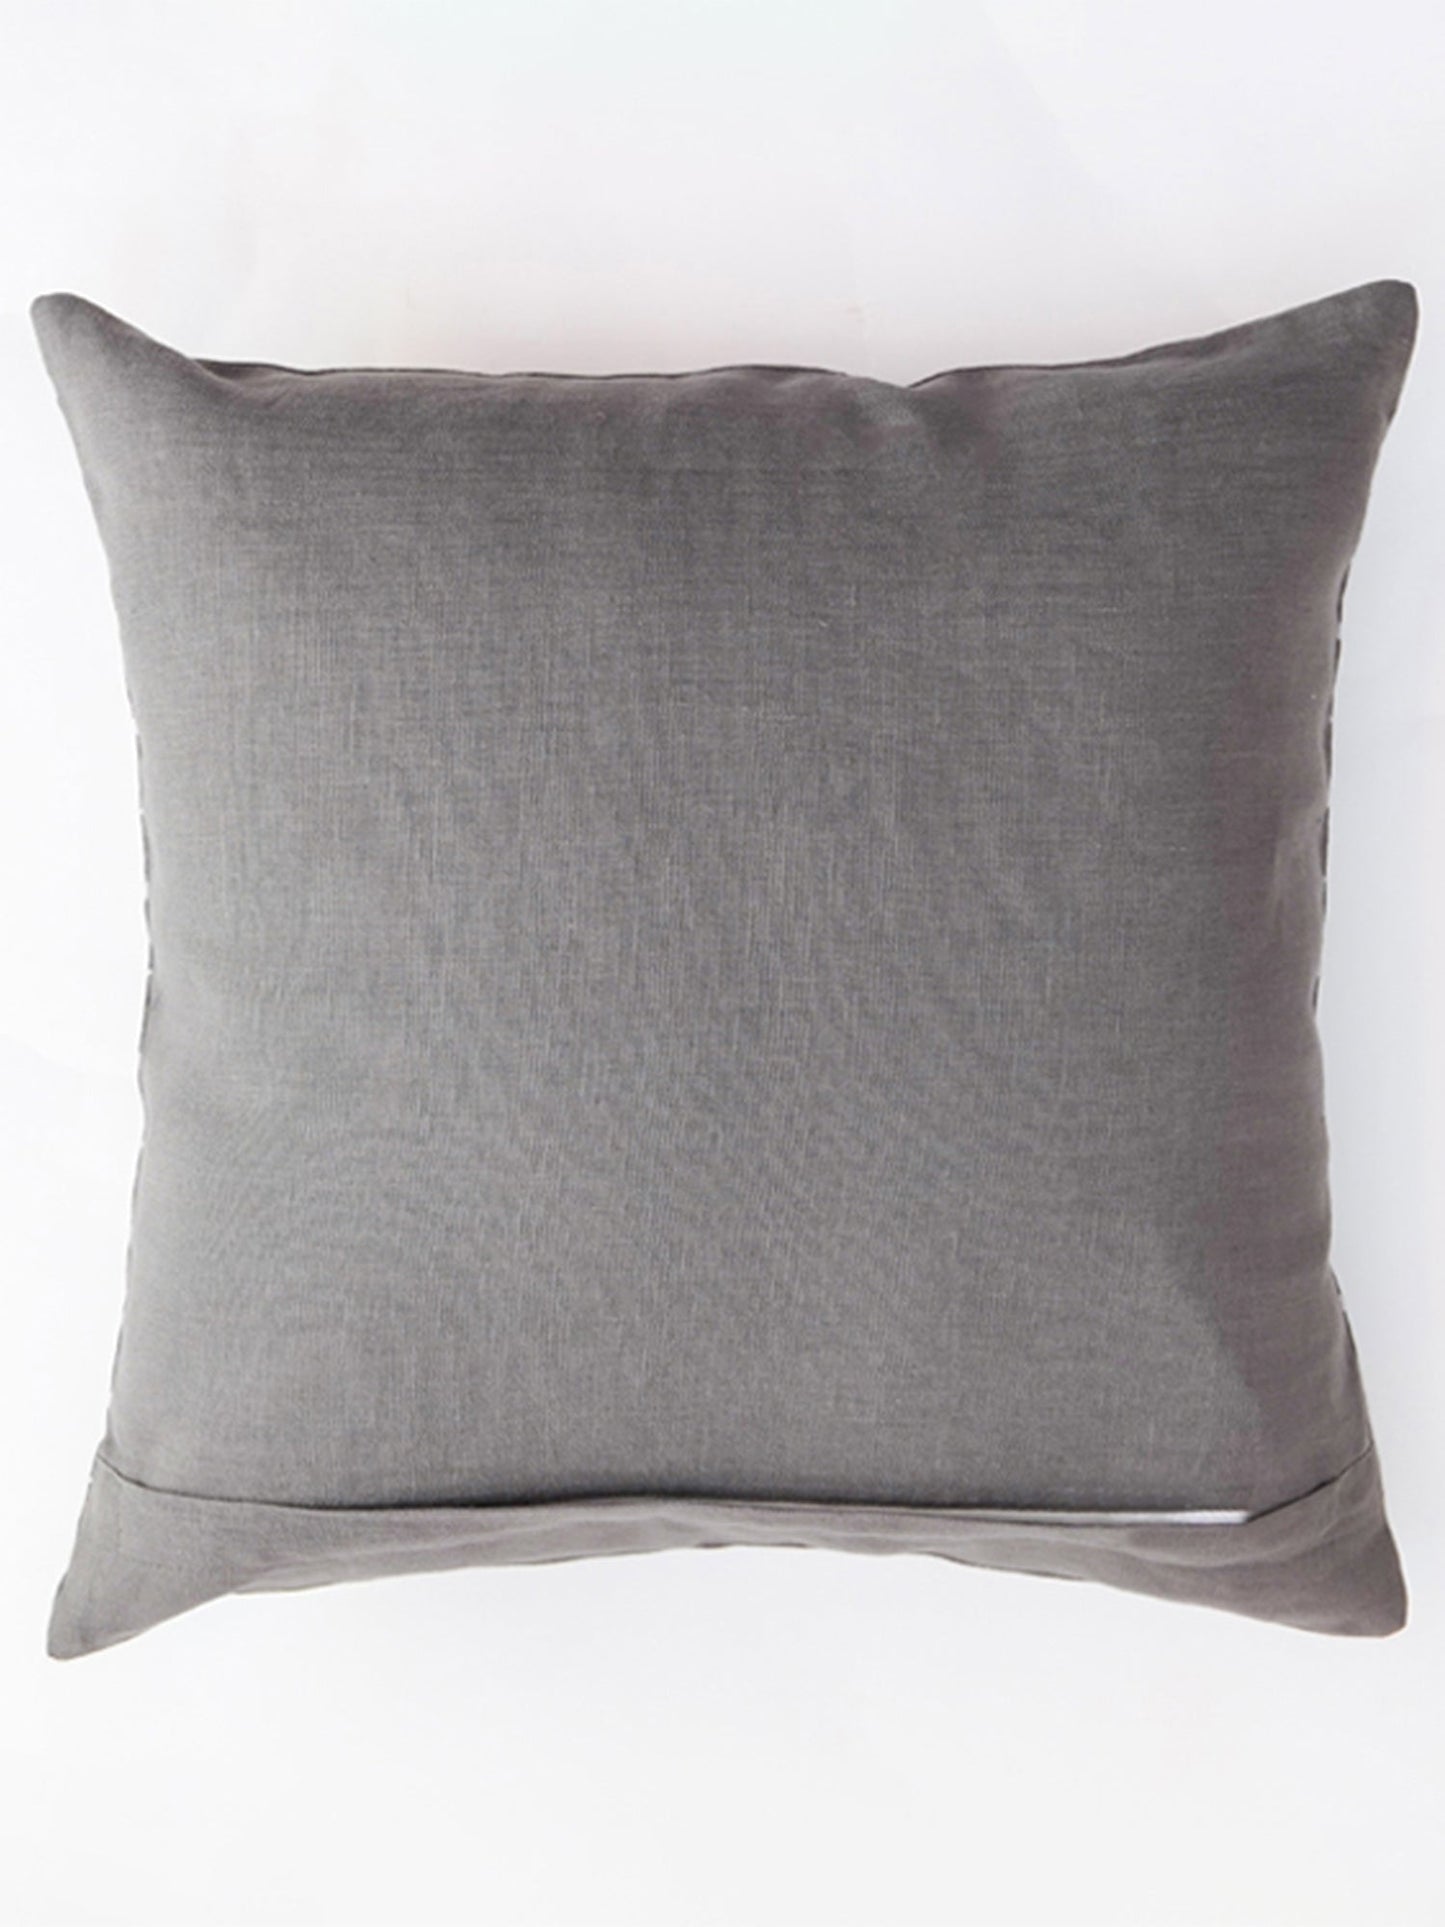 Embroidered Cushion Cover Cotton Linen  Striped  Dark Grey - 16" X 16"